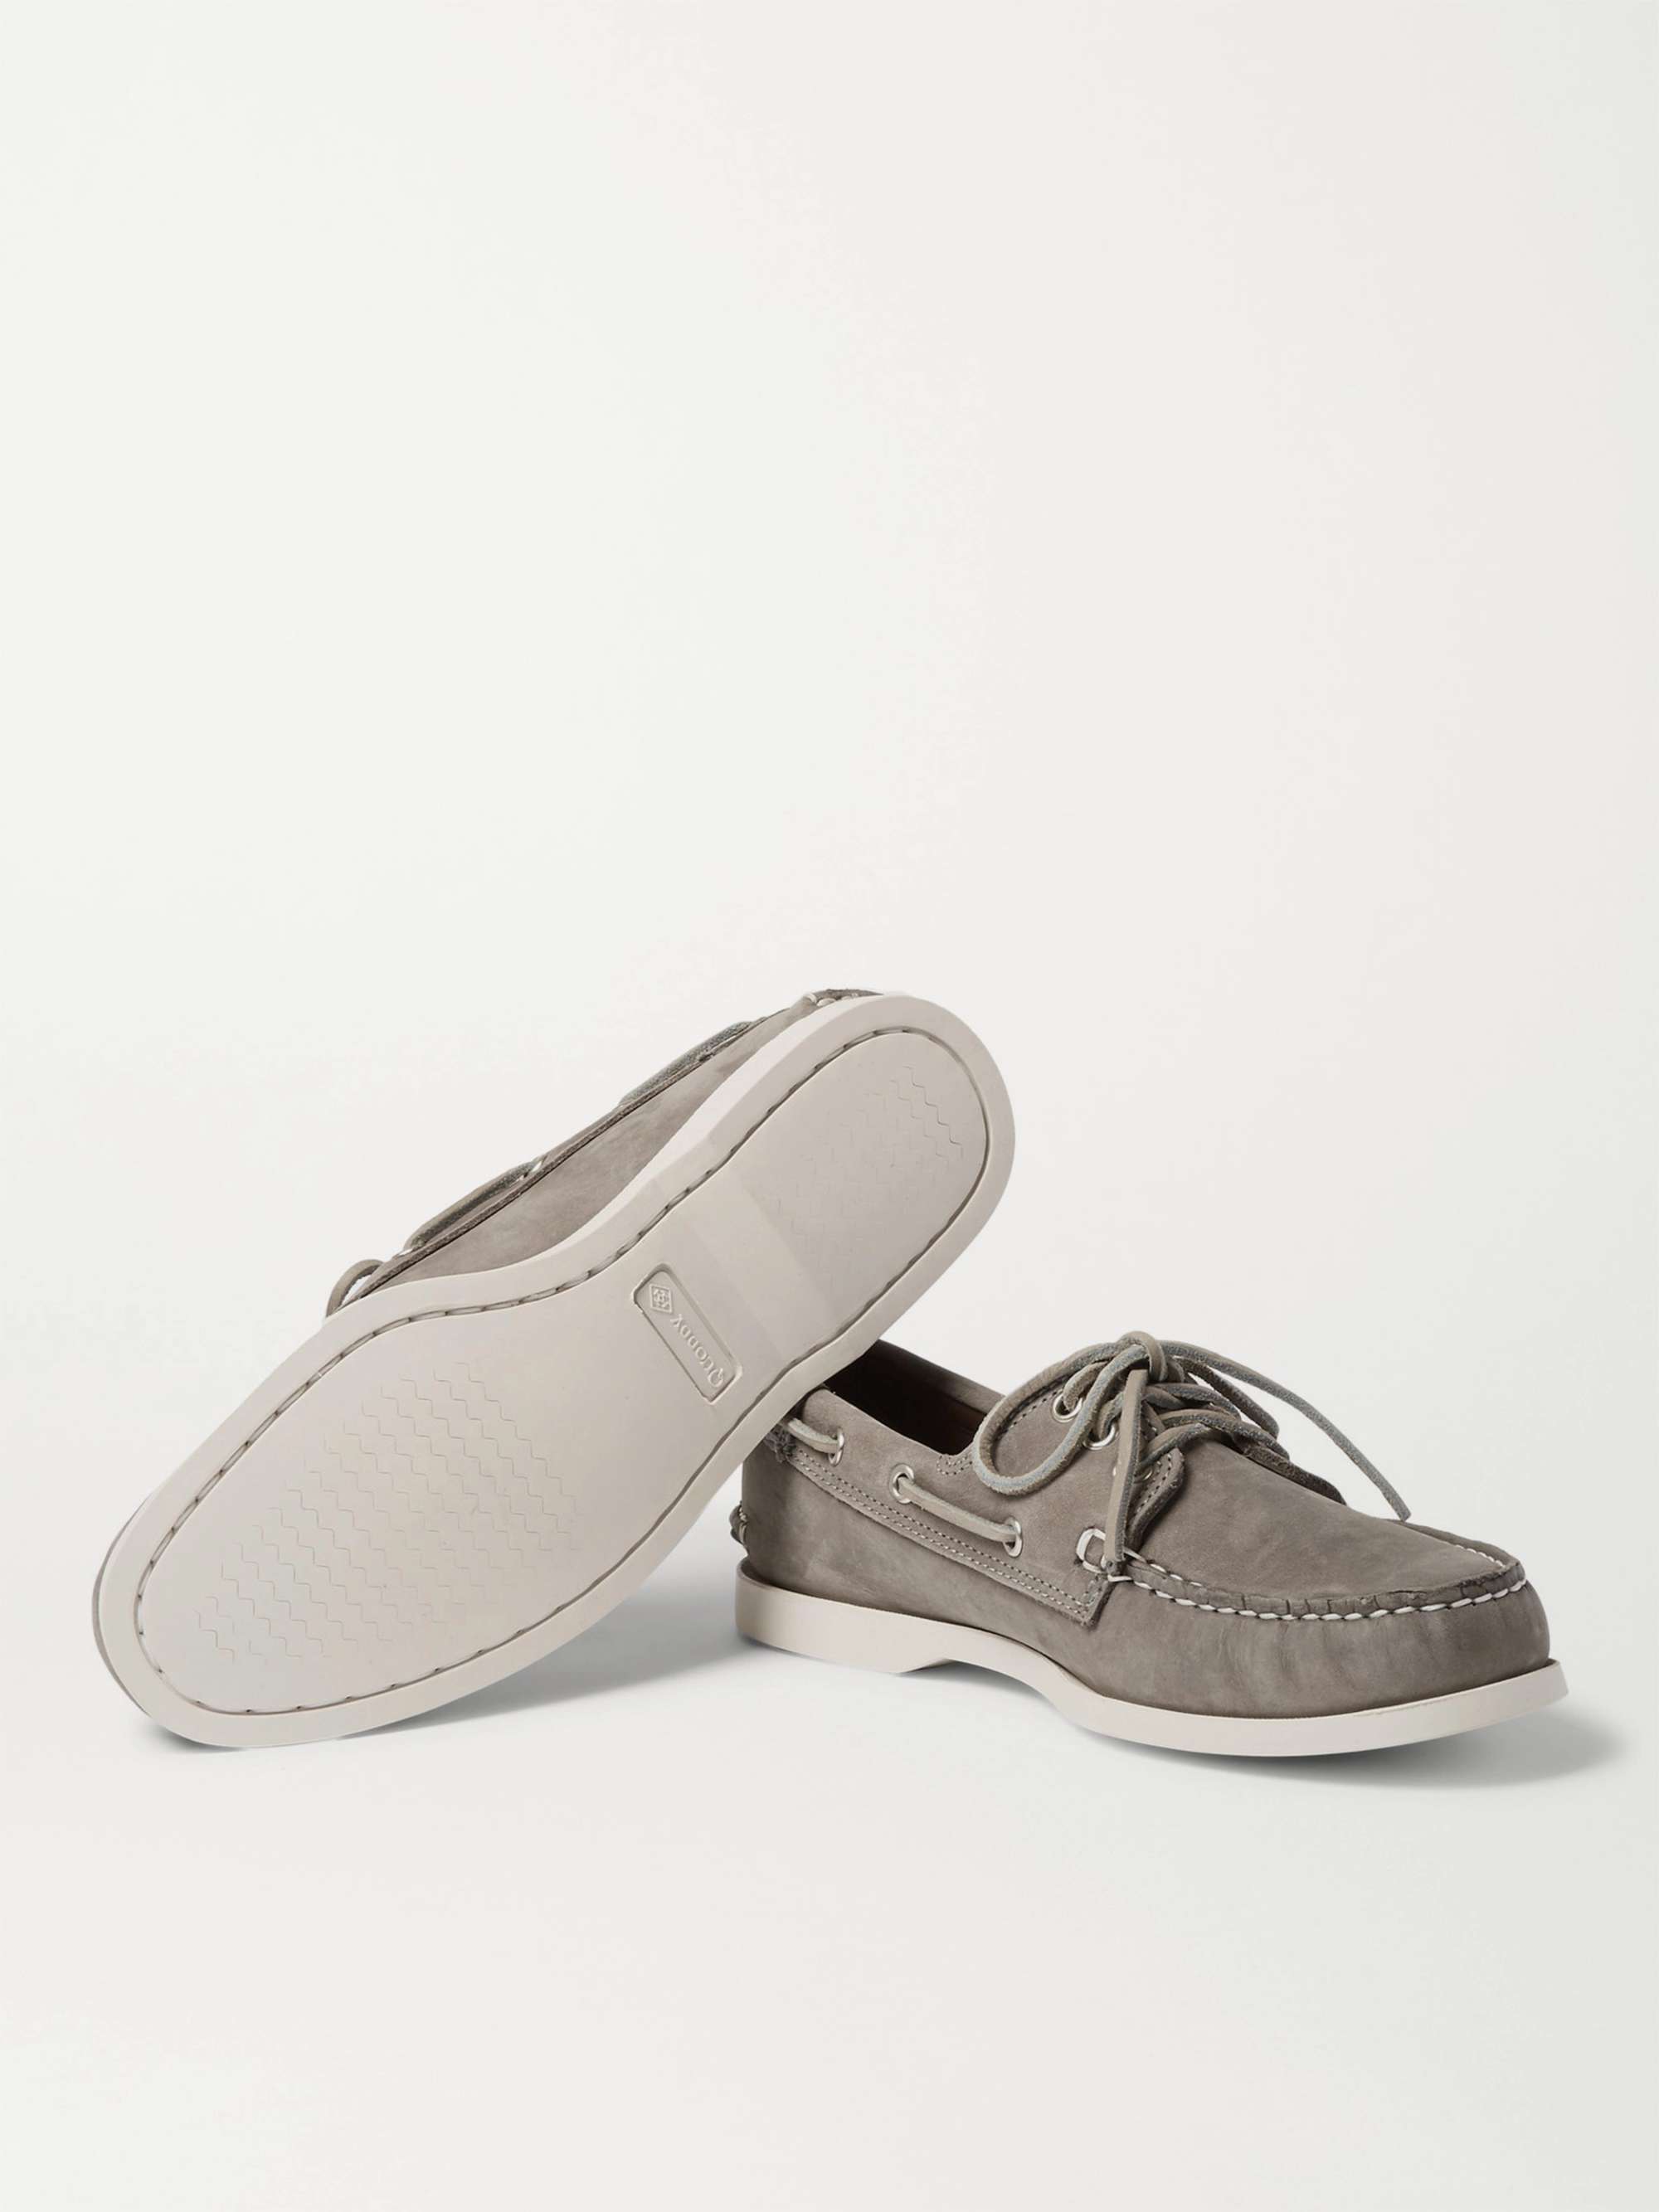 QUODDY Downeast Nubuck Boat Shoes